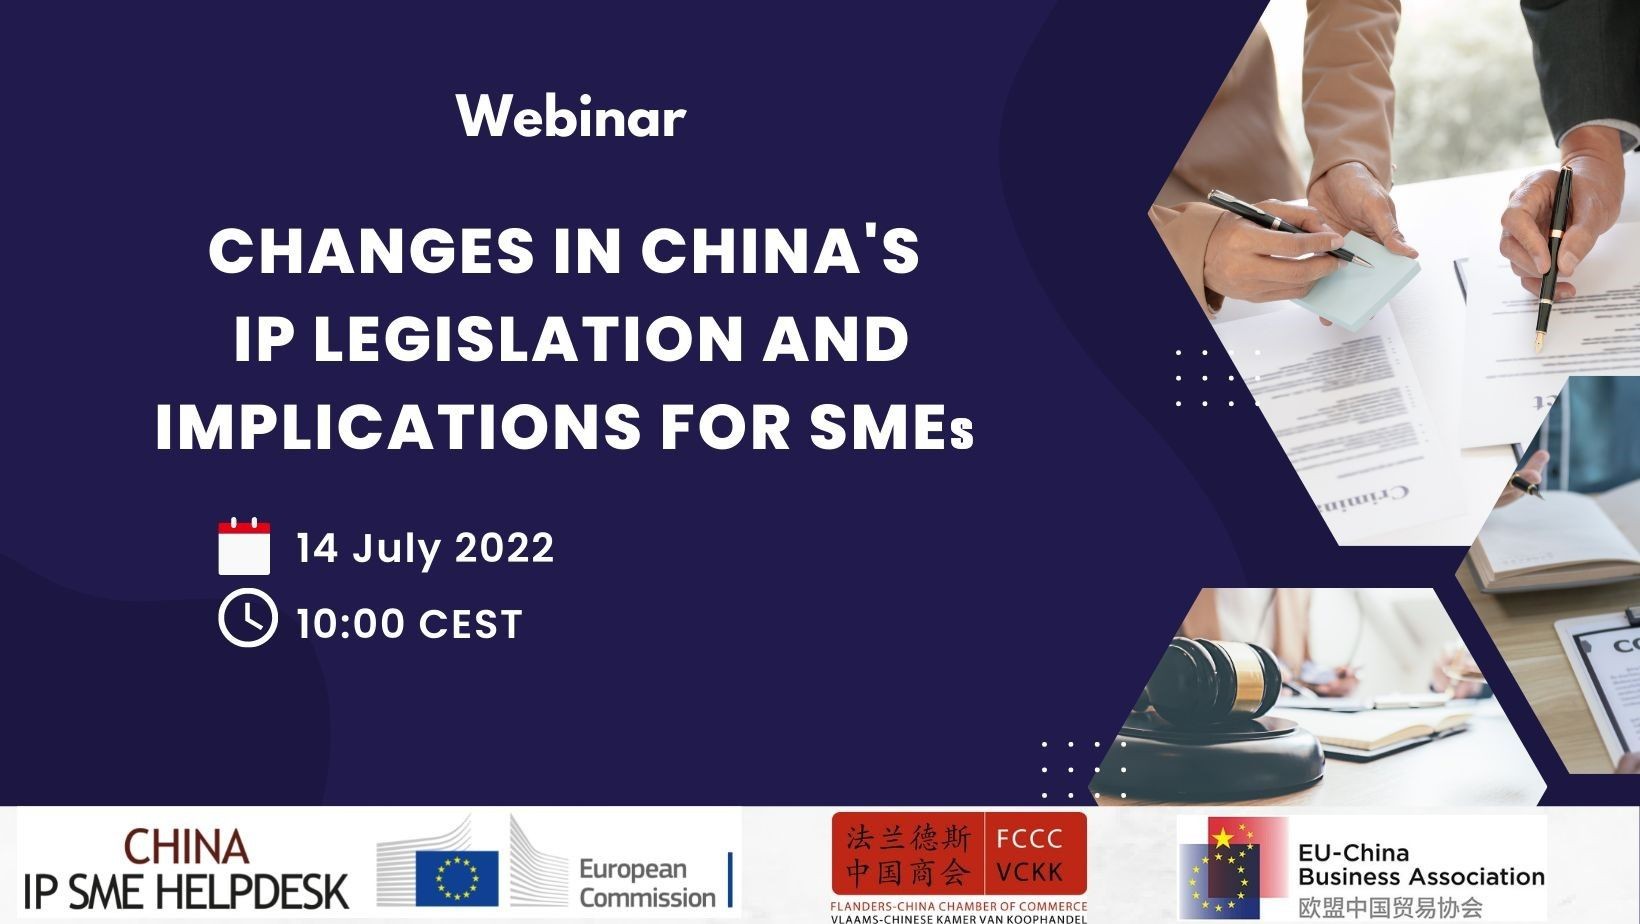 Webinar: Changes in China’s IP legislation and implications for SMEs